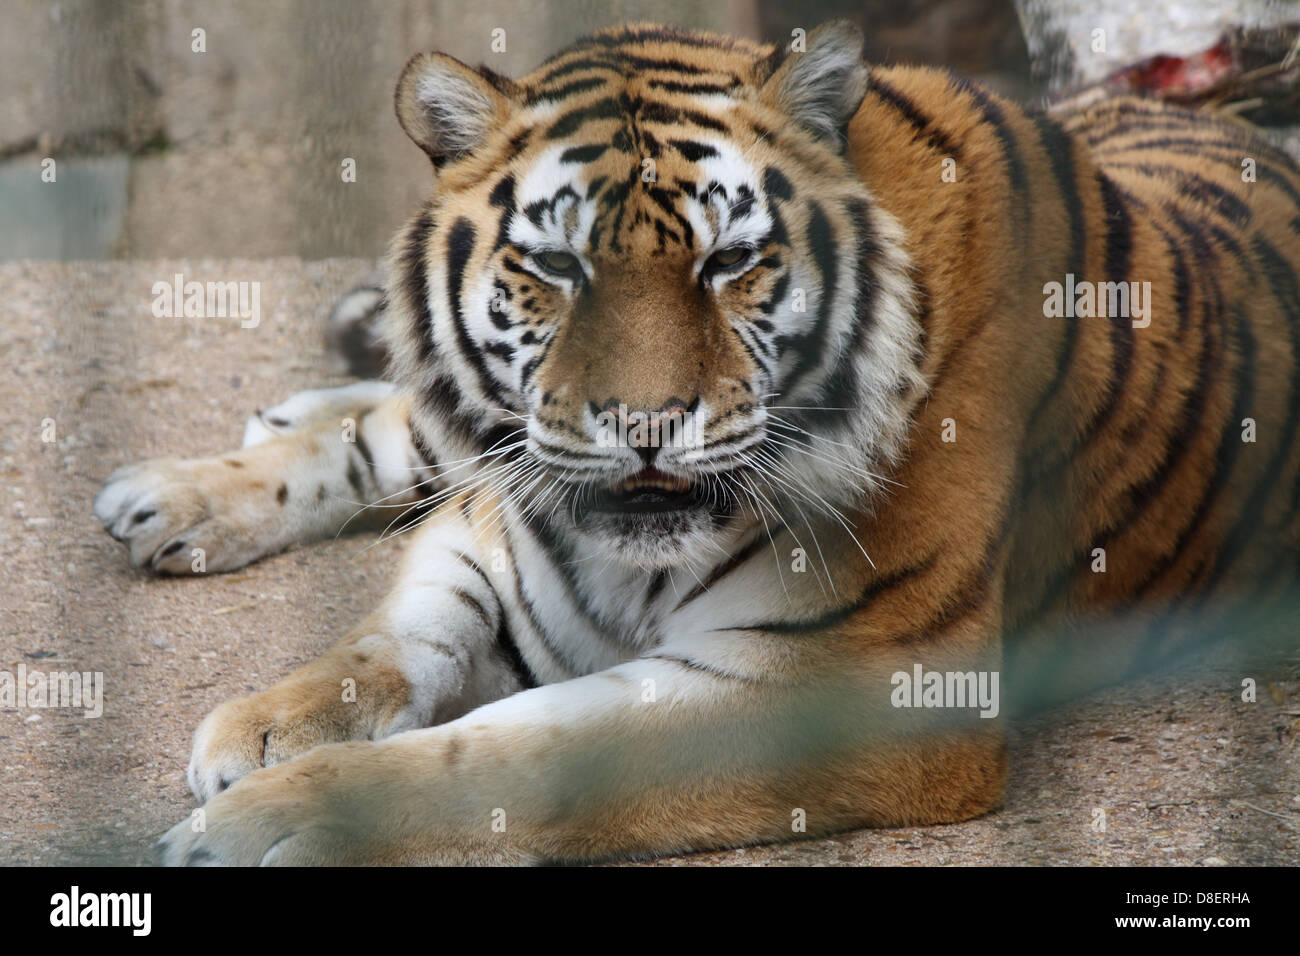 Tiger sitting down in a zoo enclosure. Stock Photo